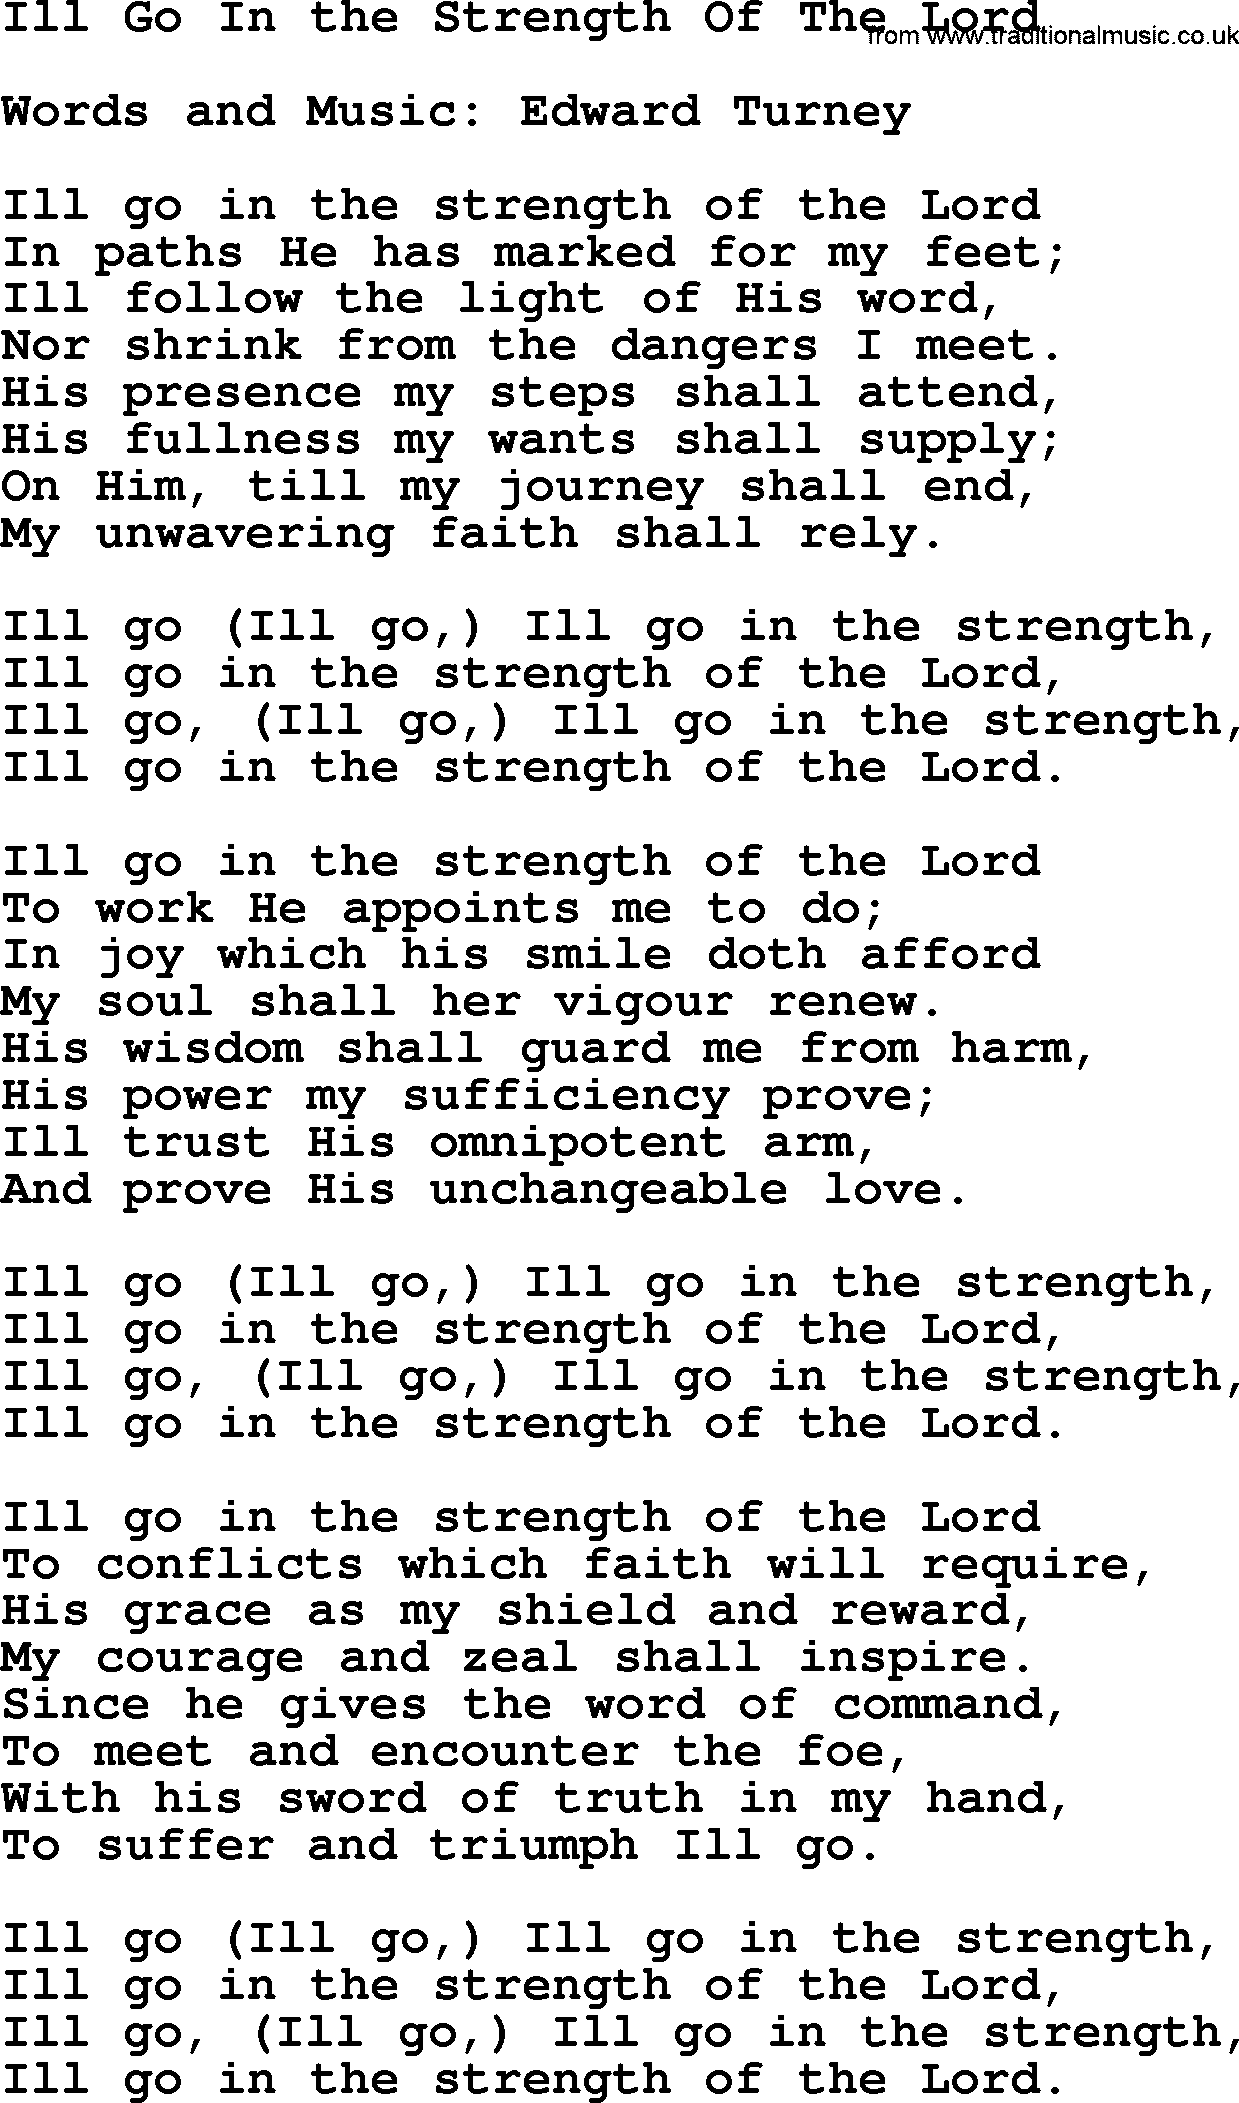 Top 500 Hymn: I'll Go In The Strength Of The Lord, lyrics